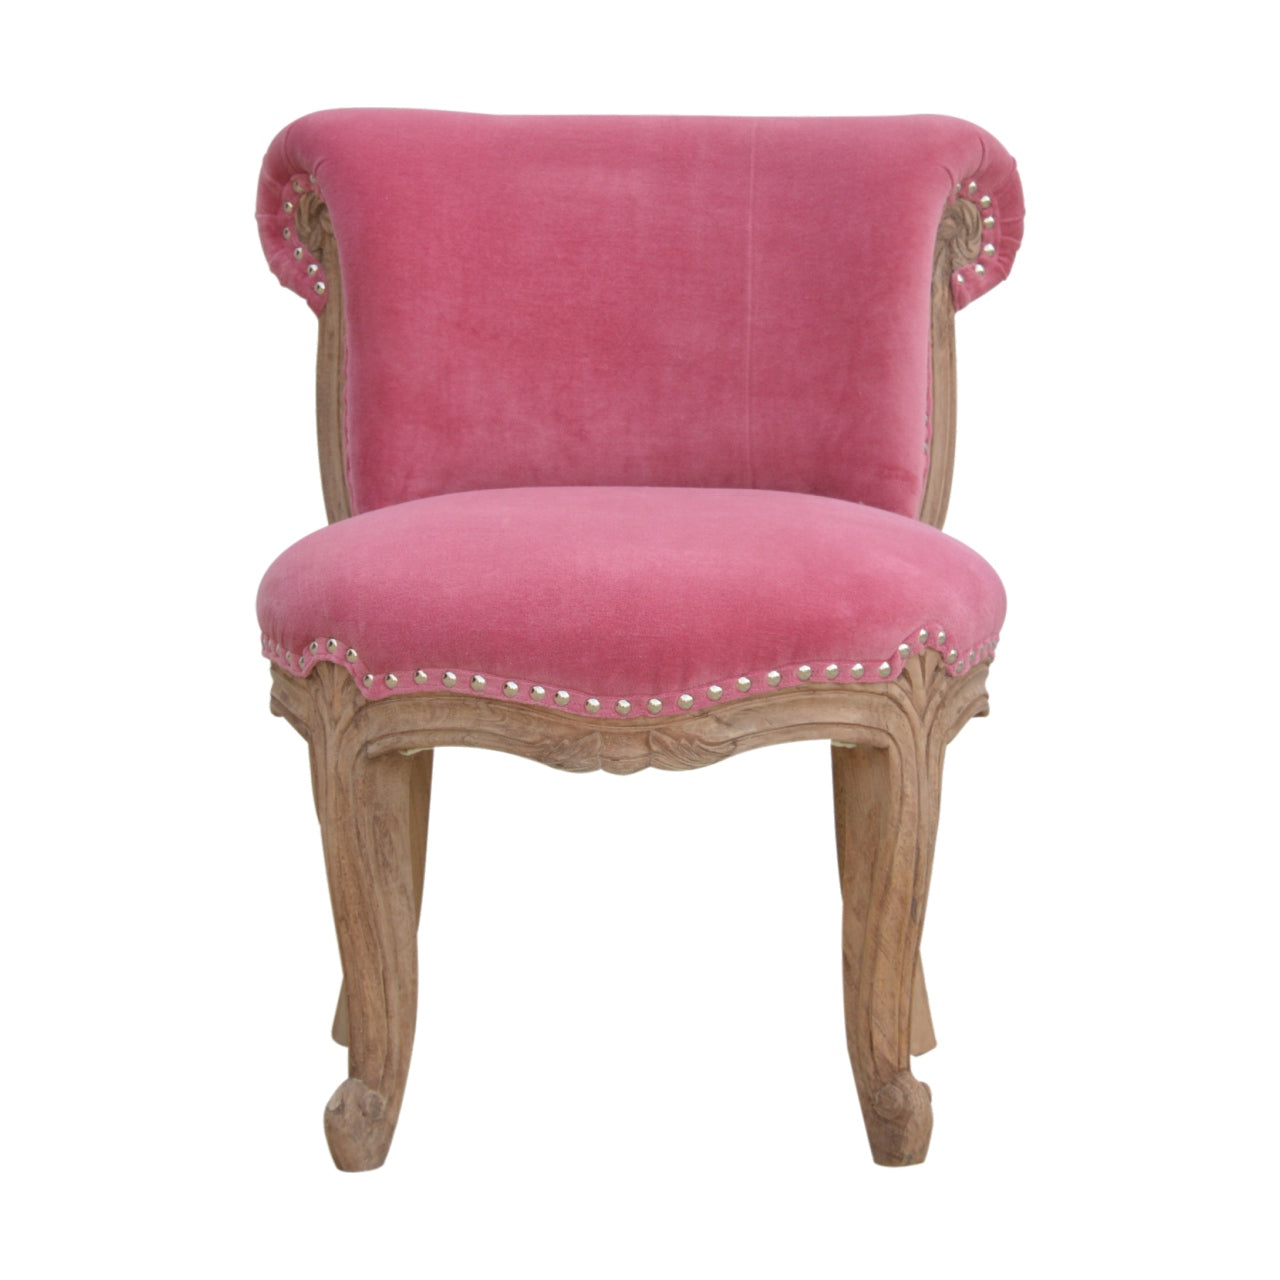 Solid Wood Petite French Chair In Pink Velvet